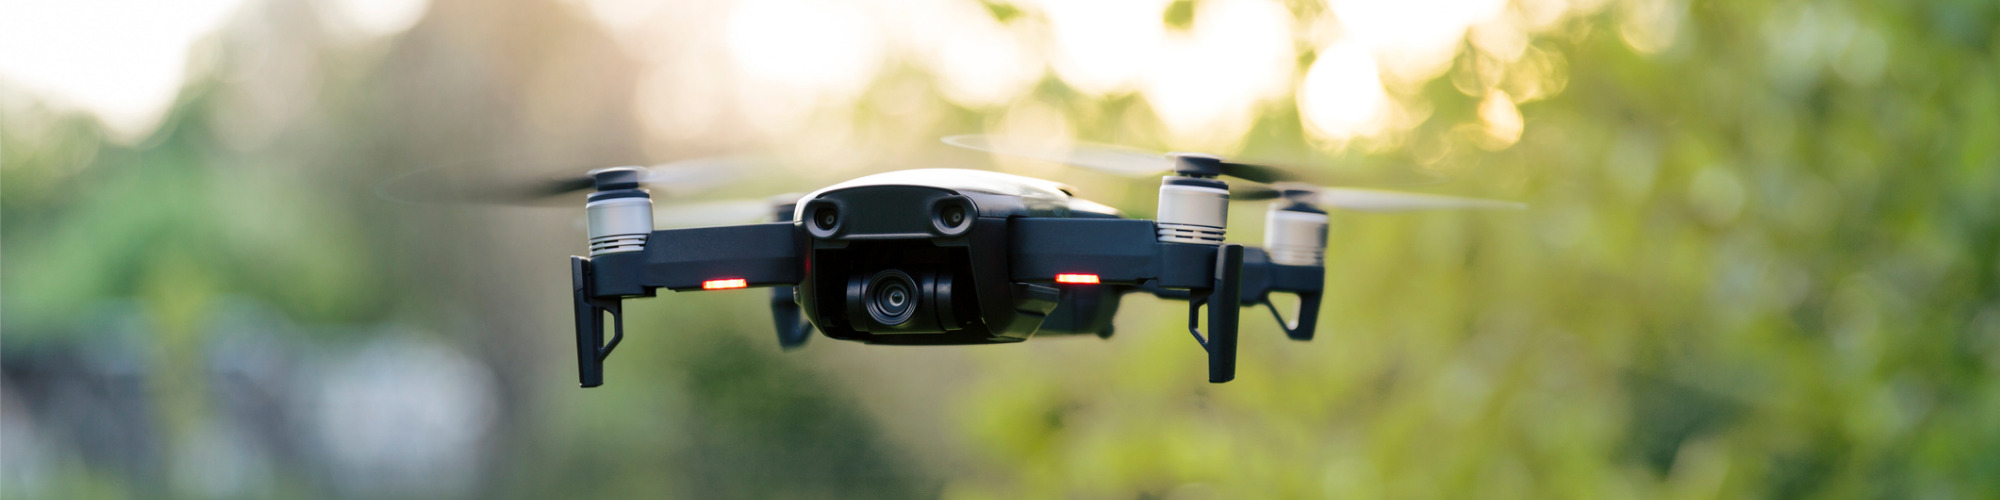 Misuse of Lasers & Drones - A Guide for Criminal Lawyers